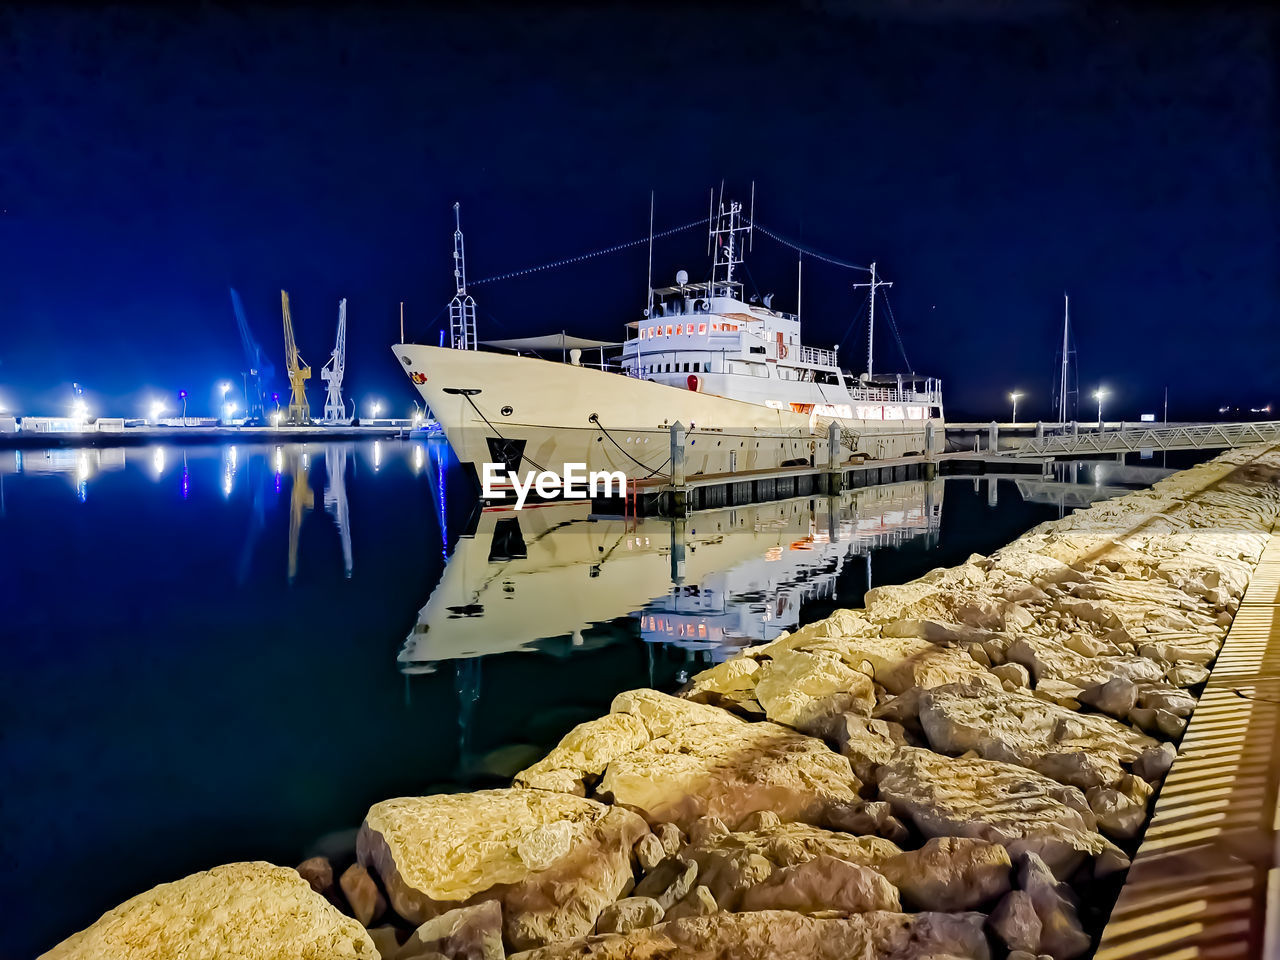 water, nautical vessel, transportation, ship, sea, vehicle, harbor, mode of transportation, nature, night, pier, reflection, dock, sky, no people, boat, watercraft, moored, outdoors, architecture, marina, industry, ocean